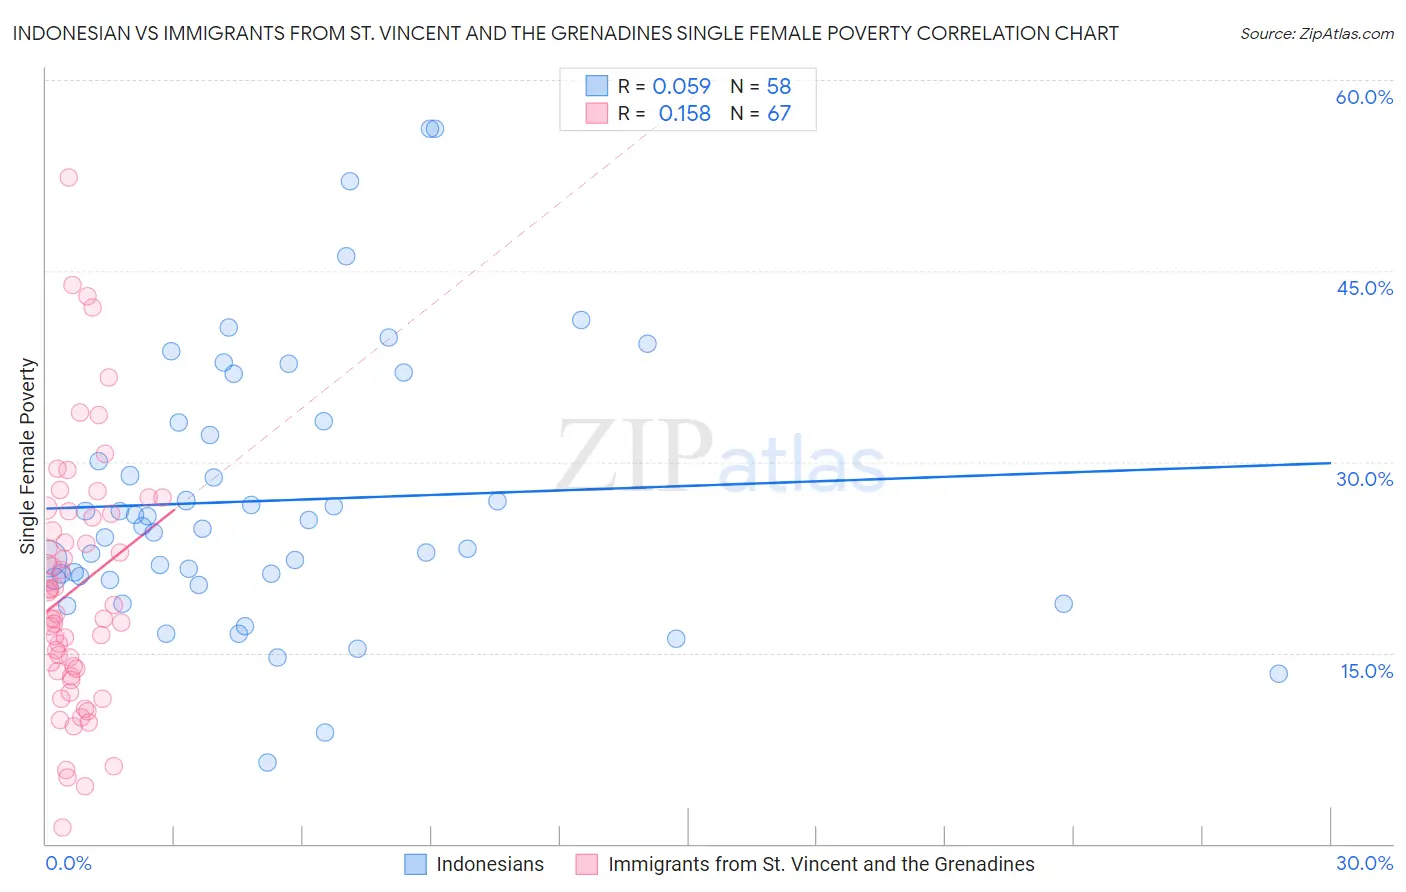 Indonesian vs Immigrants from St. Vincent and the Grenadines Single Female Poverty